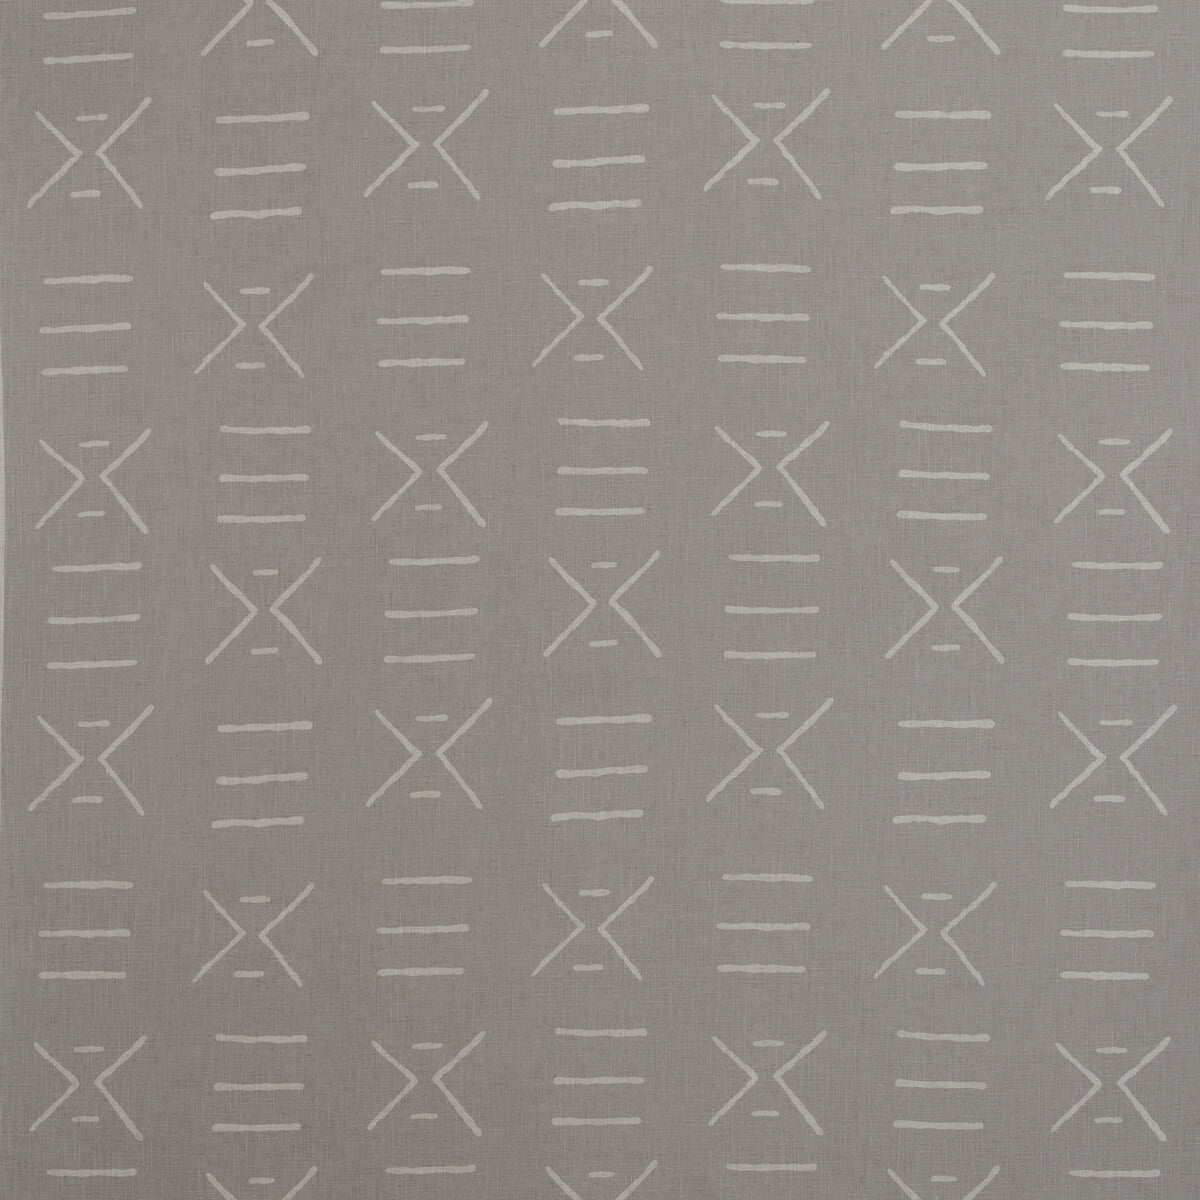 Kongo fabric in stone color - pattern AM100314.11.0 - by Kravet Couture in the Andrew Martin Gobi collection